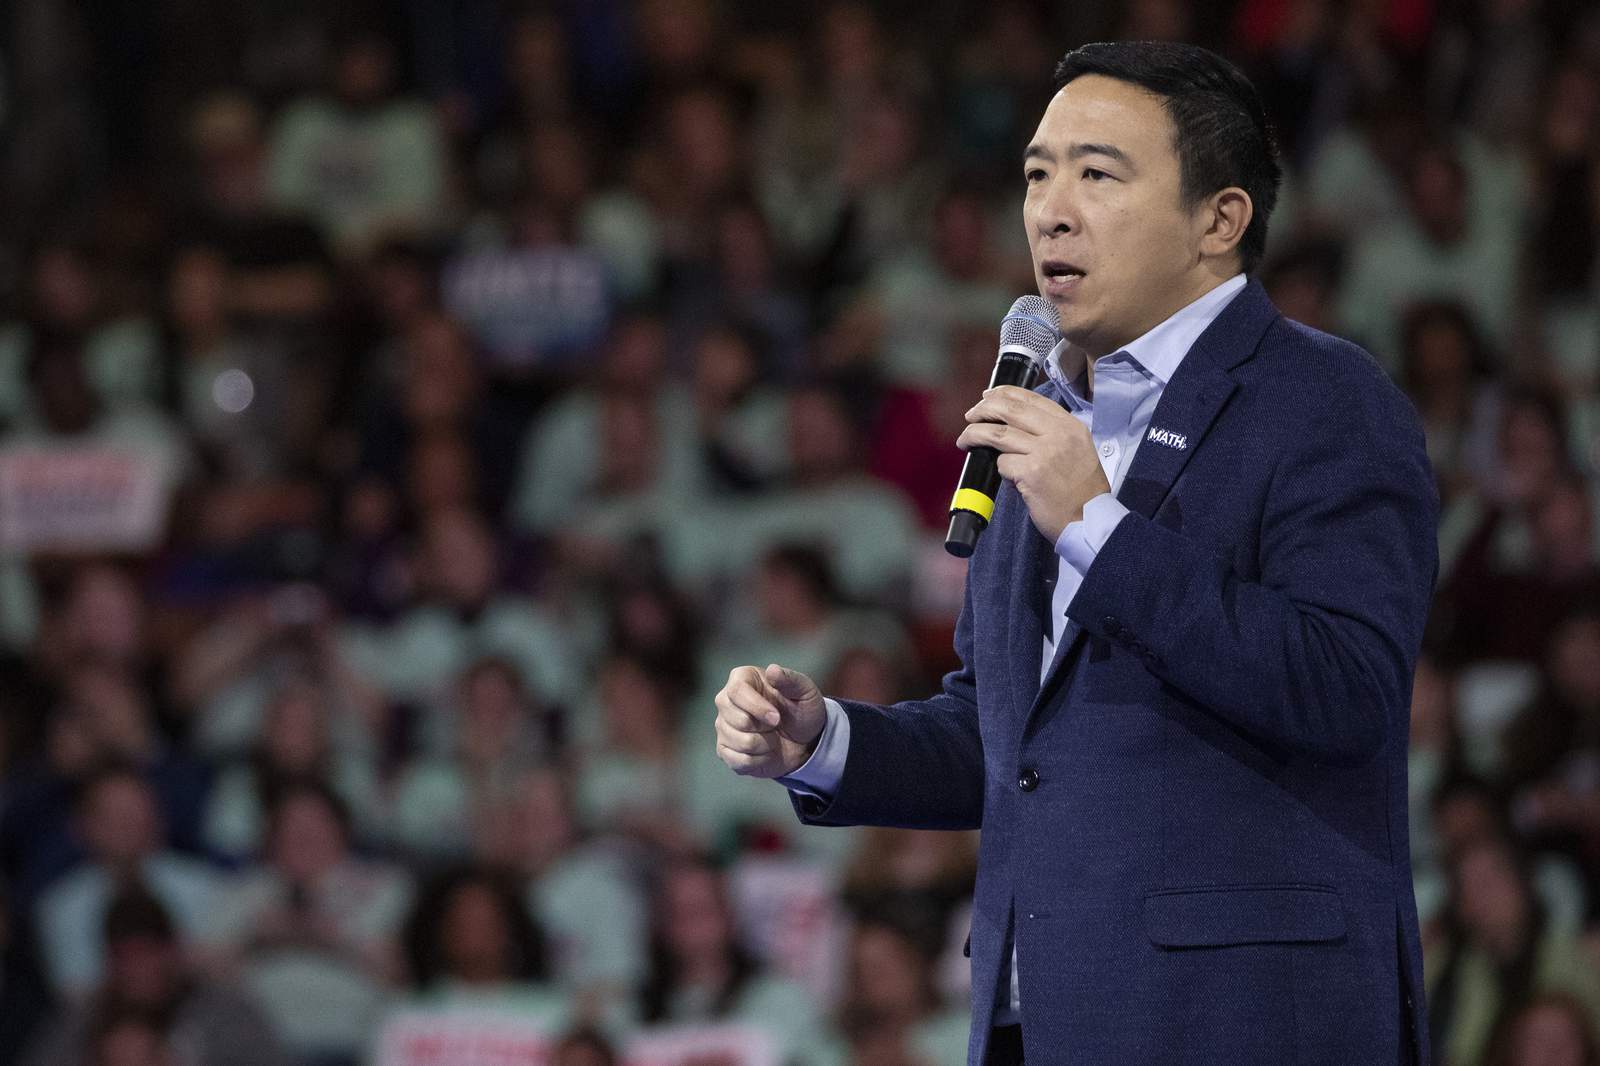 Andrew Yang, who created buzz with freedom dividend, ends 2020 bid